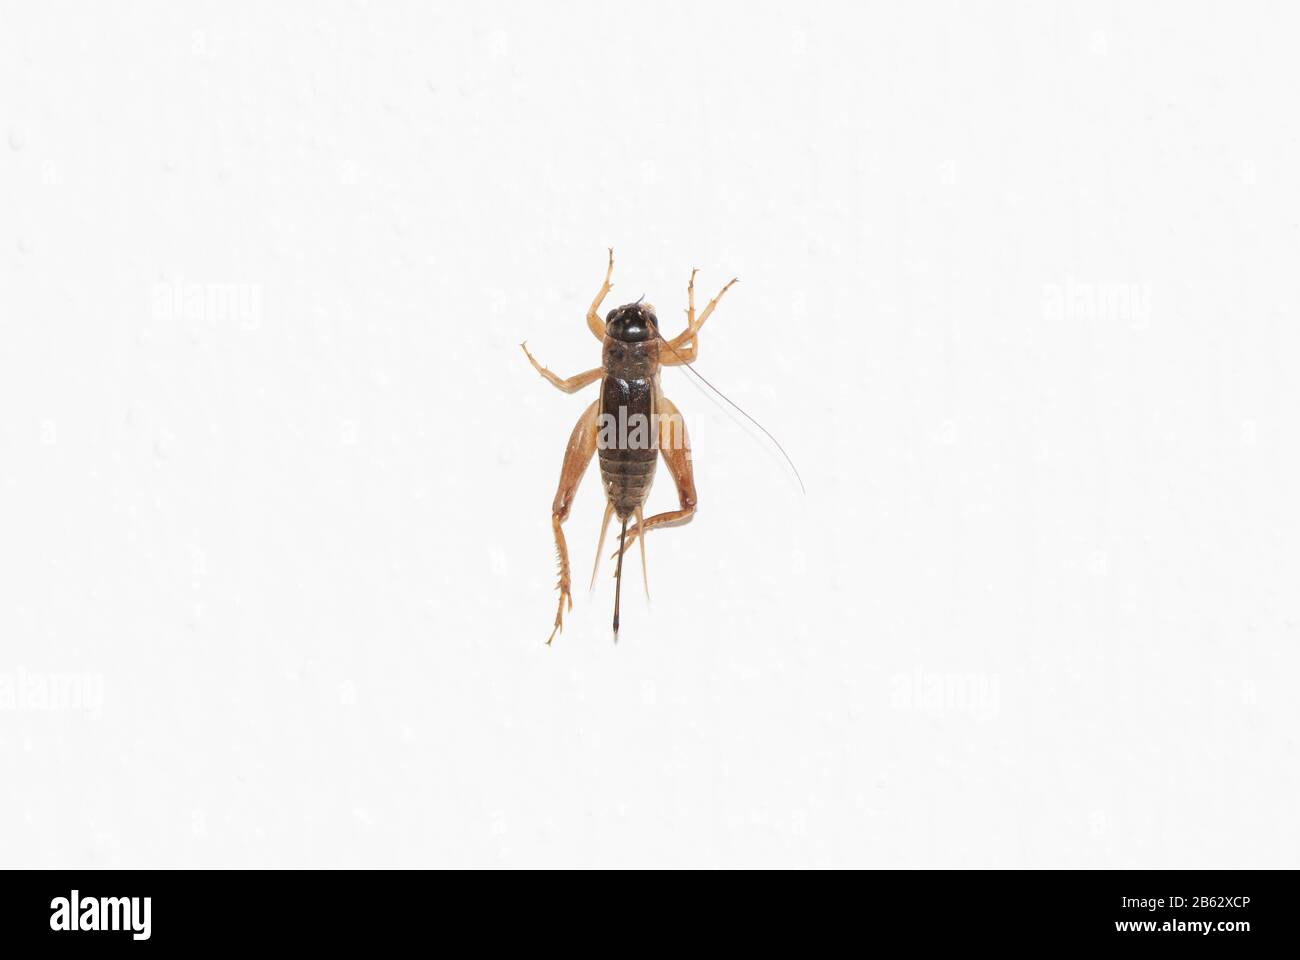 House Cricket on a White Wall Stock Photo